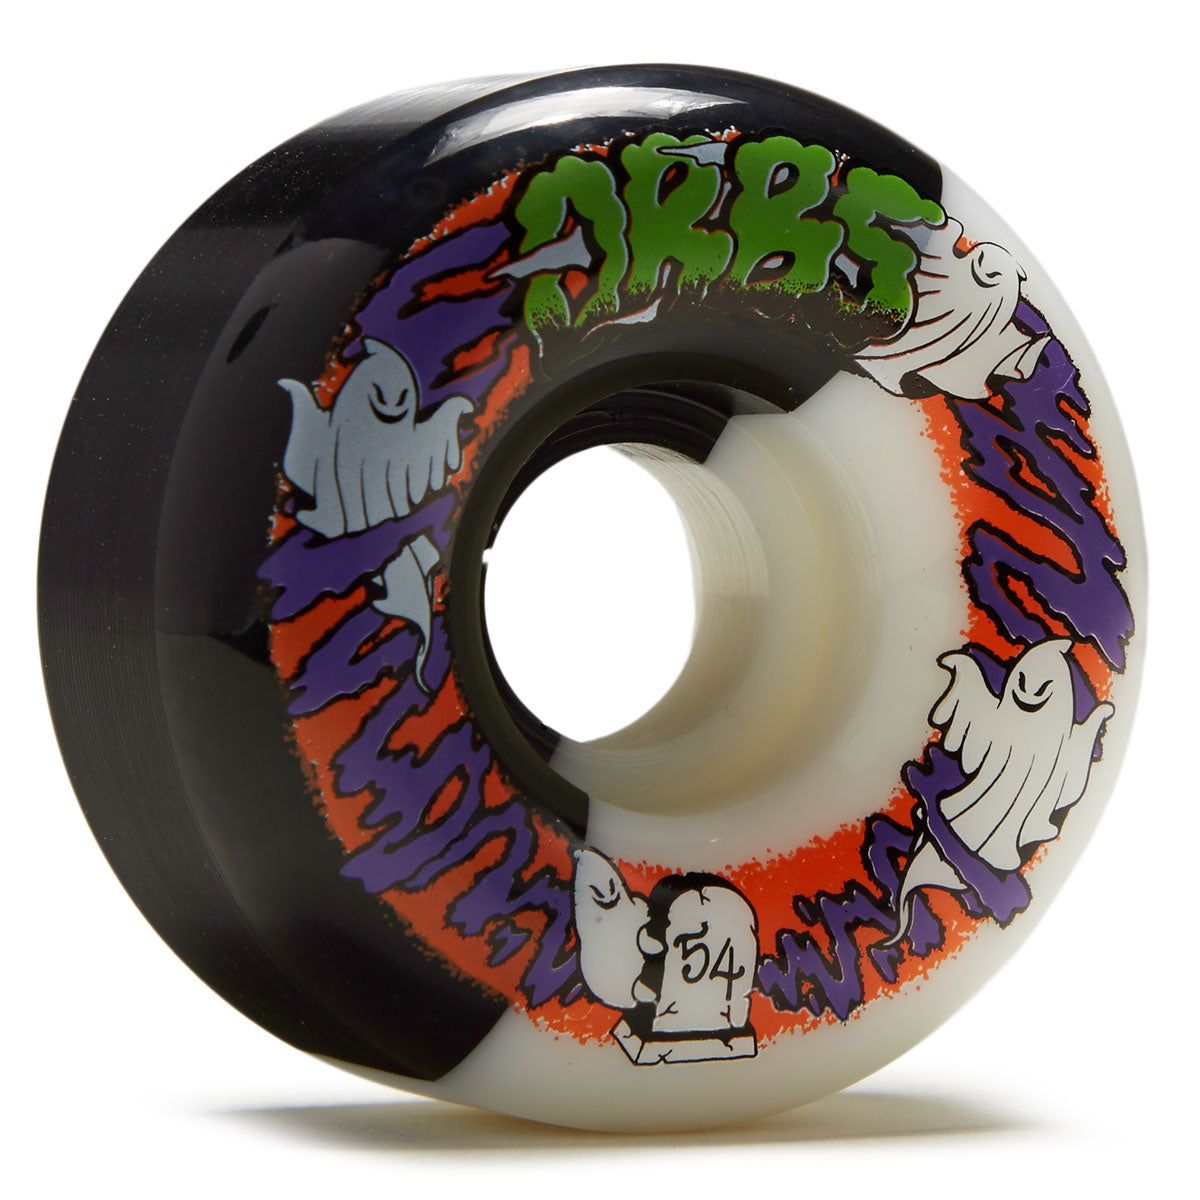 Welcome Orbs Apparitions '23 Round 99A Skateboard Wheels - Black/White Split - 54mm image 1